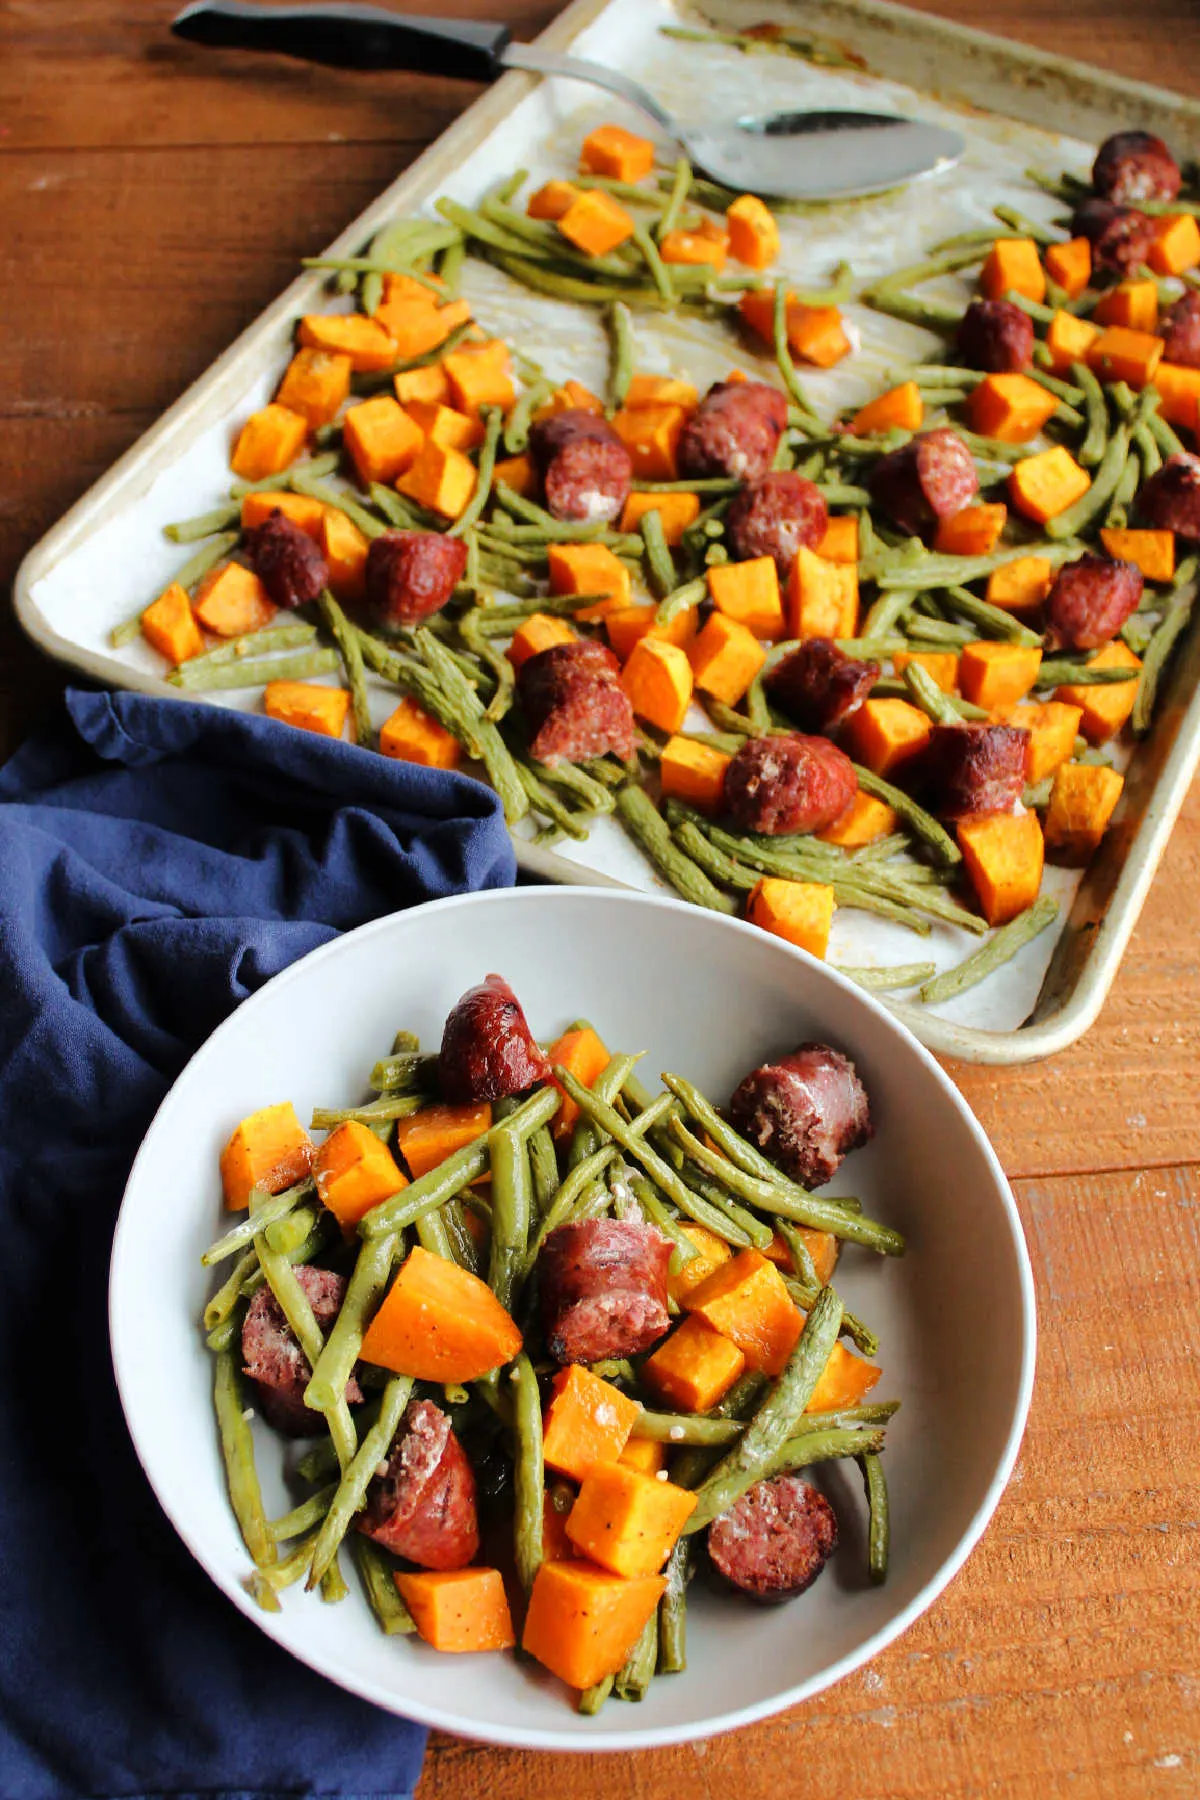 Bowl of roasted sweet potatoes, green beans and sausage ready to eat with sheet pan of remaining food nearby.